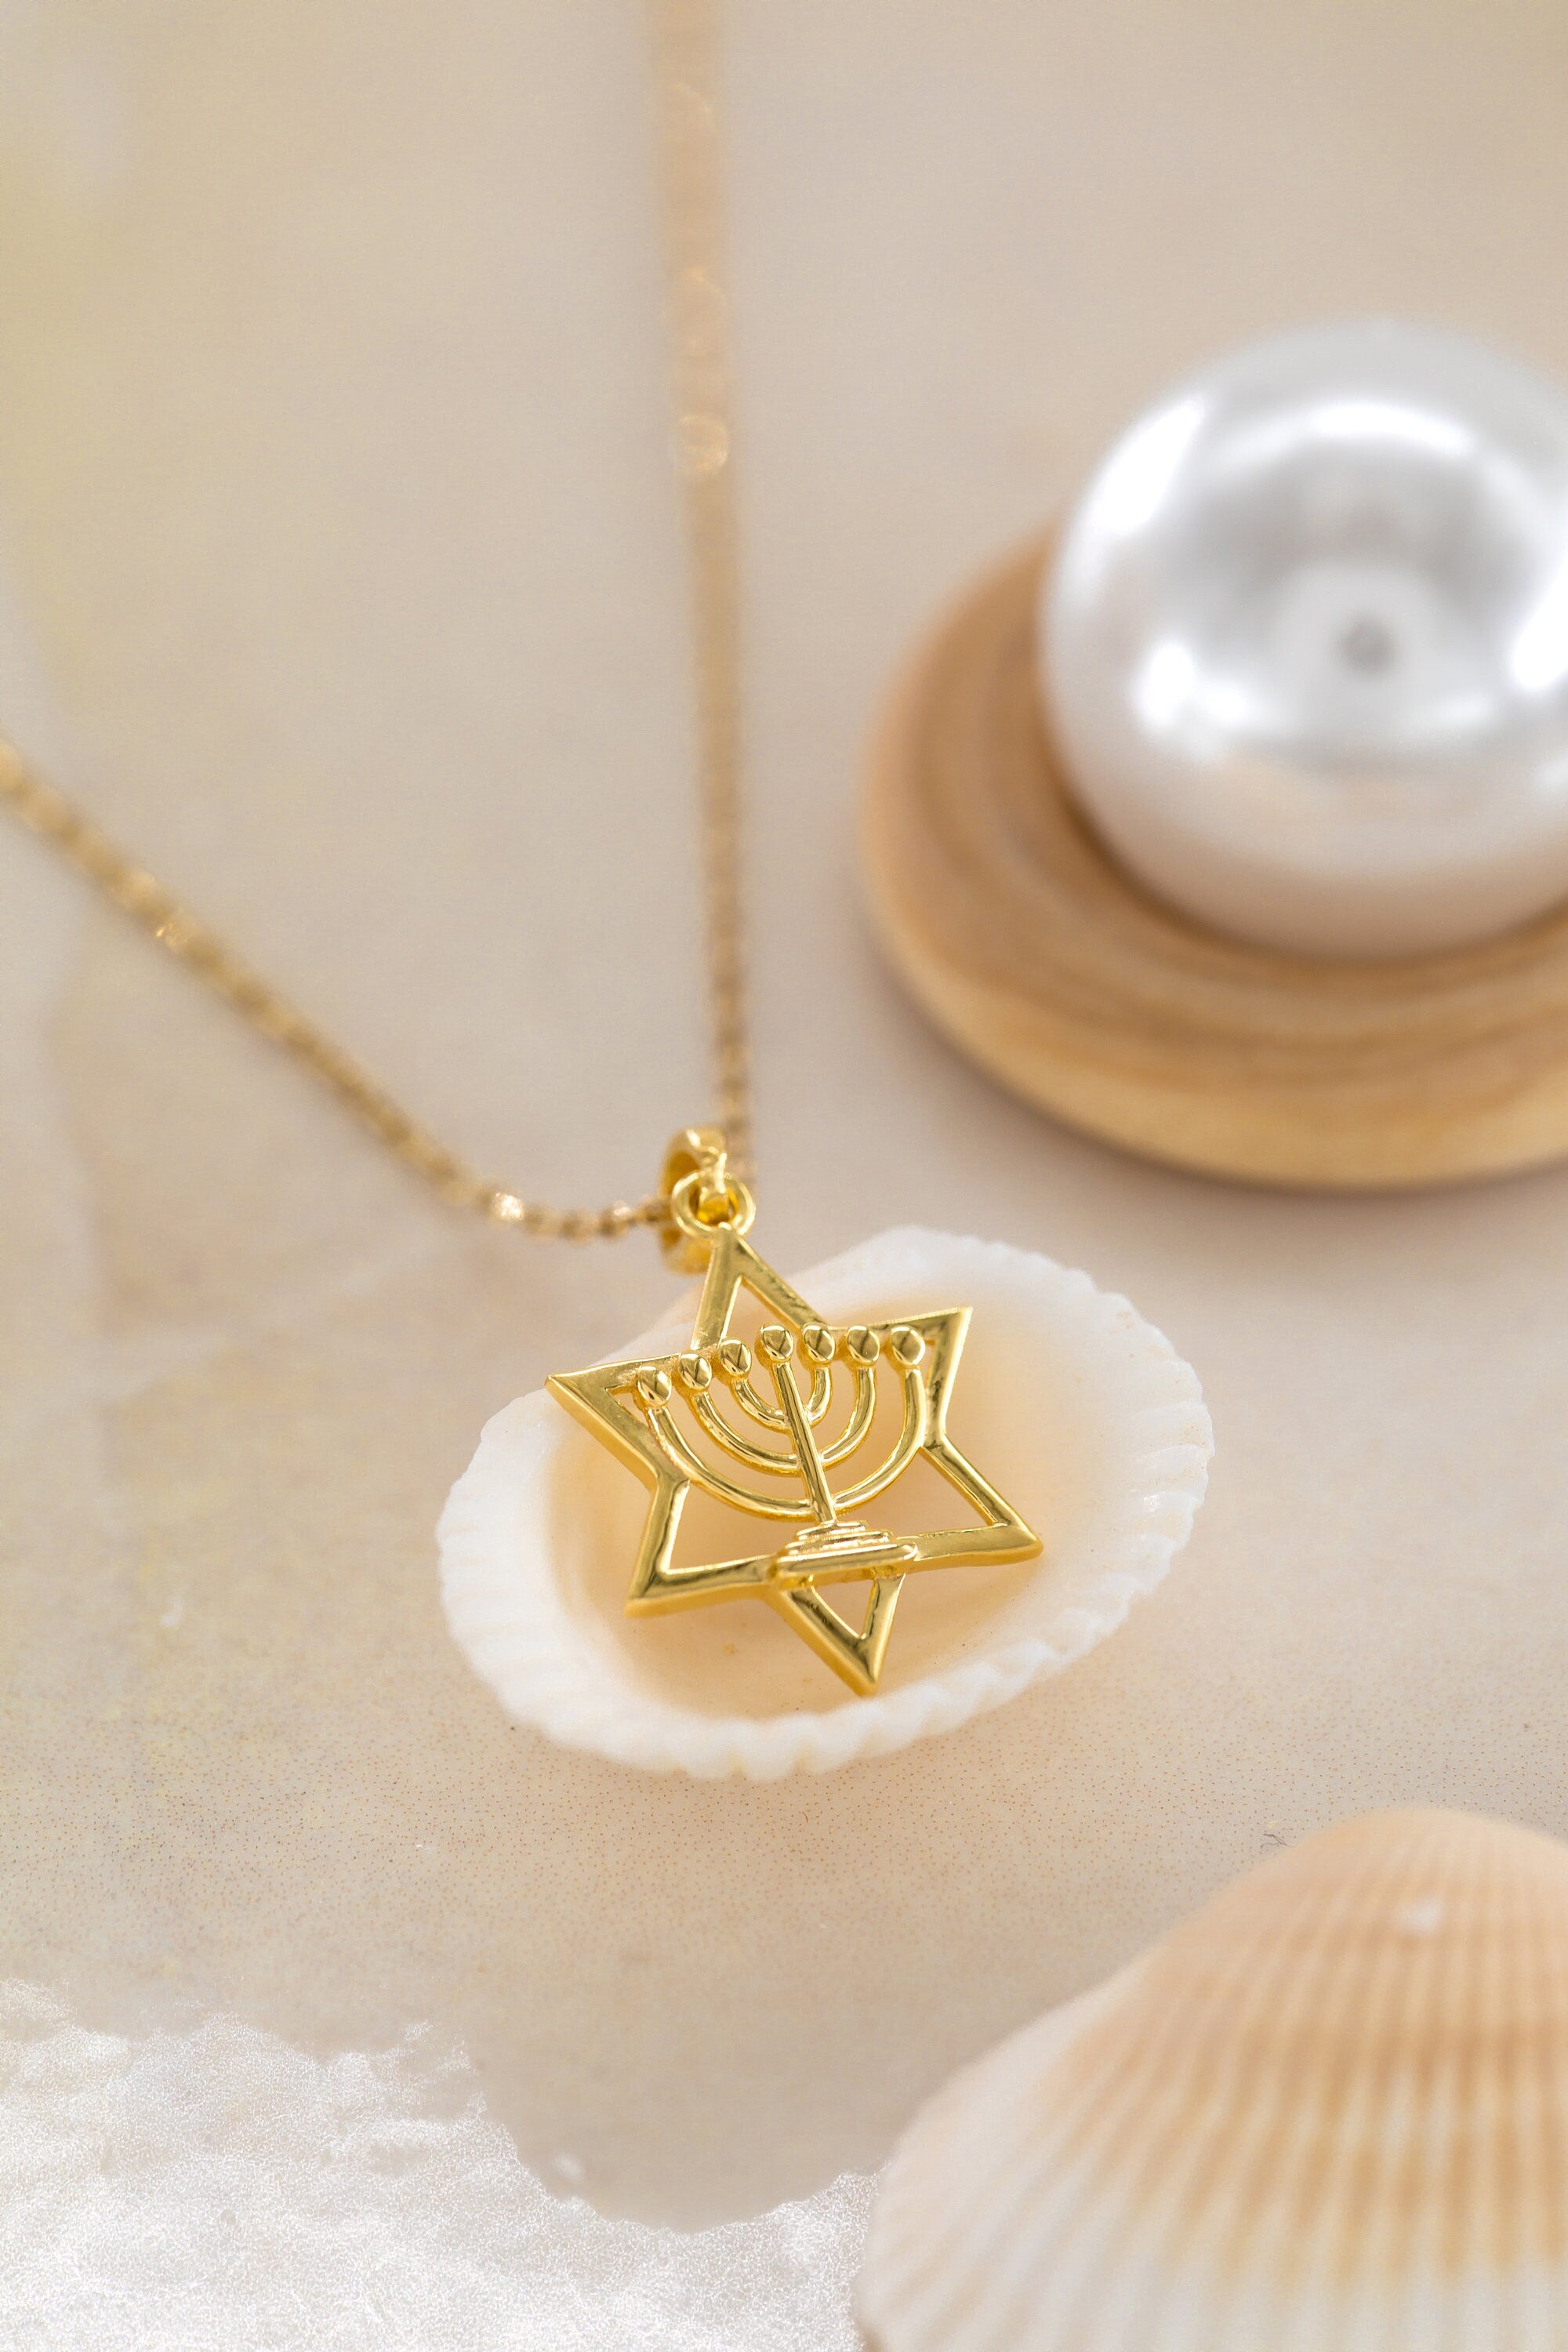 Symbolic 14K Gold David Pendant, Judaica Jewelry, Sterling Silver Religious Necklace, 925 Silver Meaningful Star of David,Unisex Judaic Gift